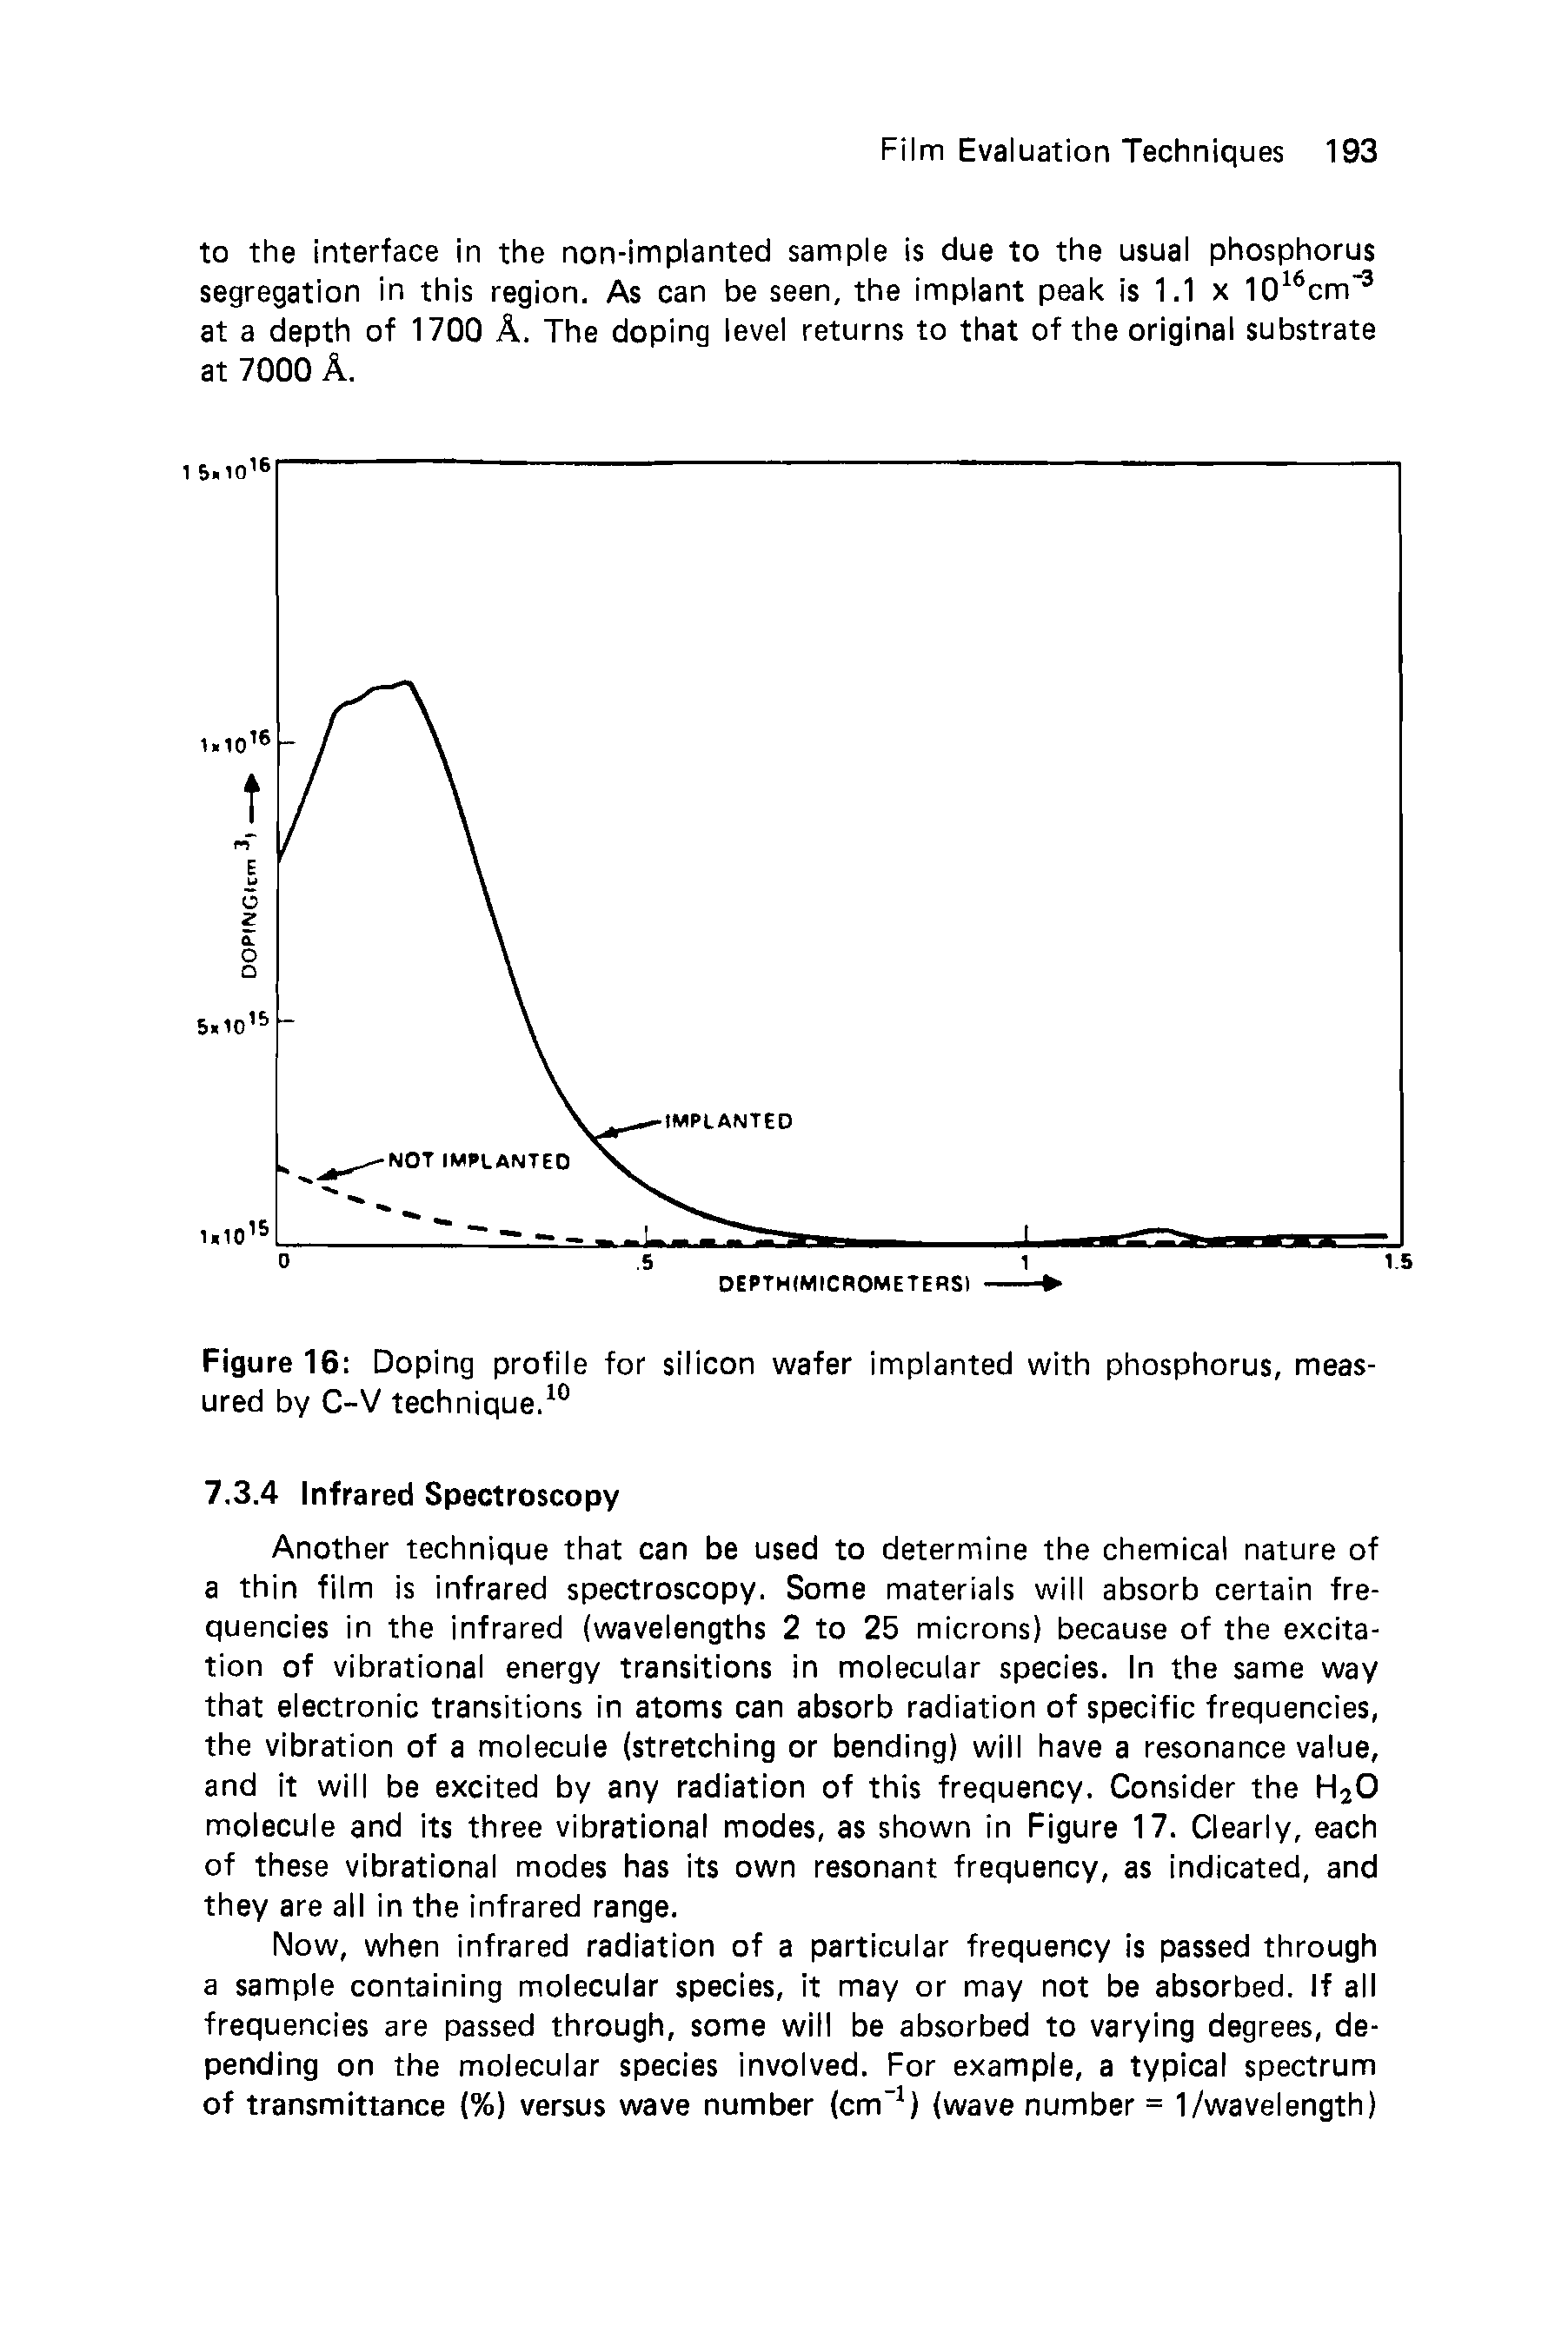 Figure 16 Doping profile for silicon wafer implanted with phosphorus, measured by C-V technique.10...